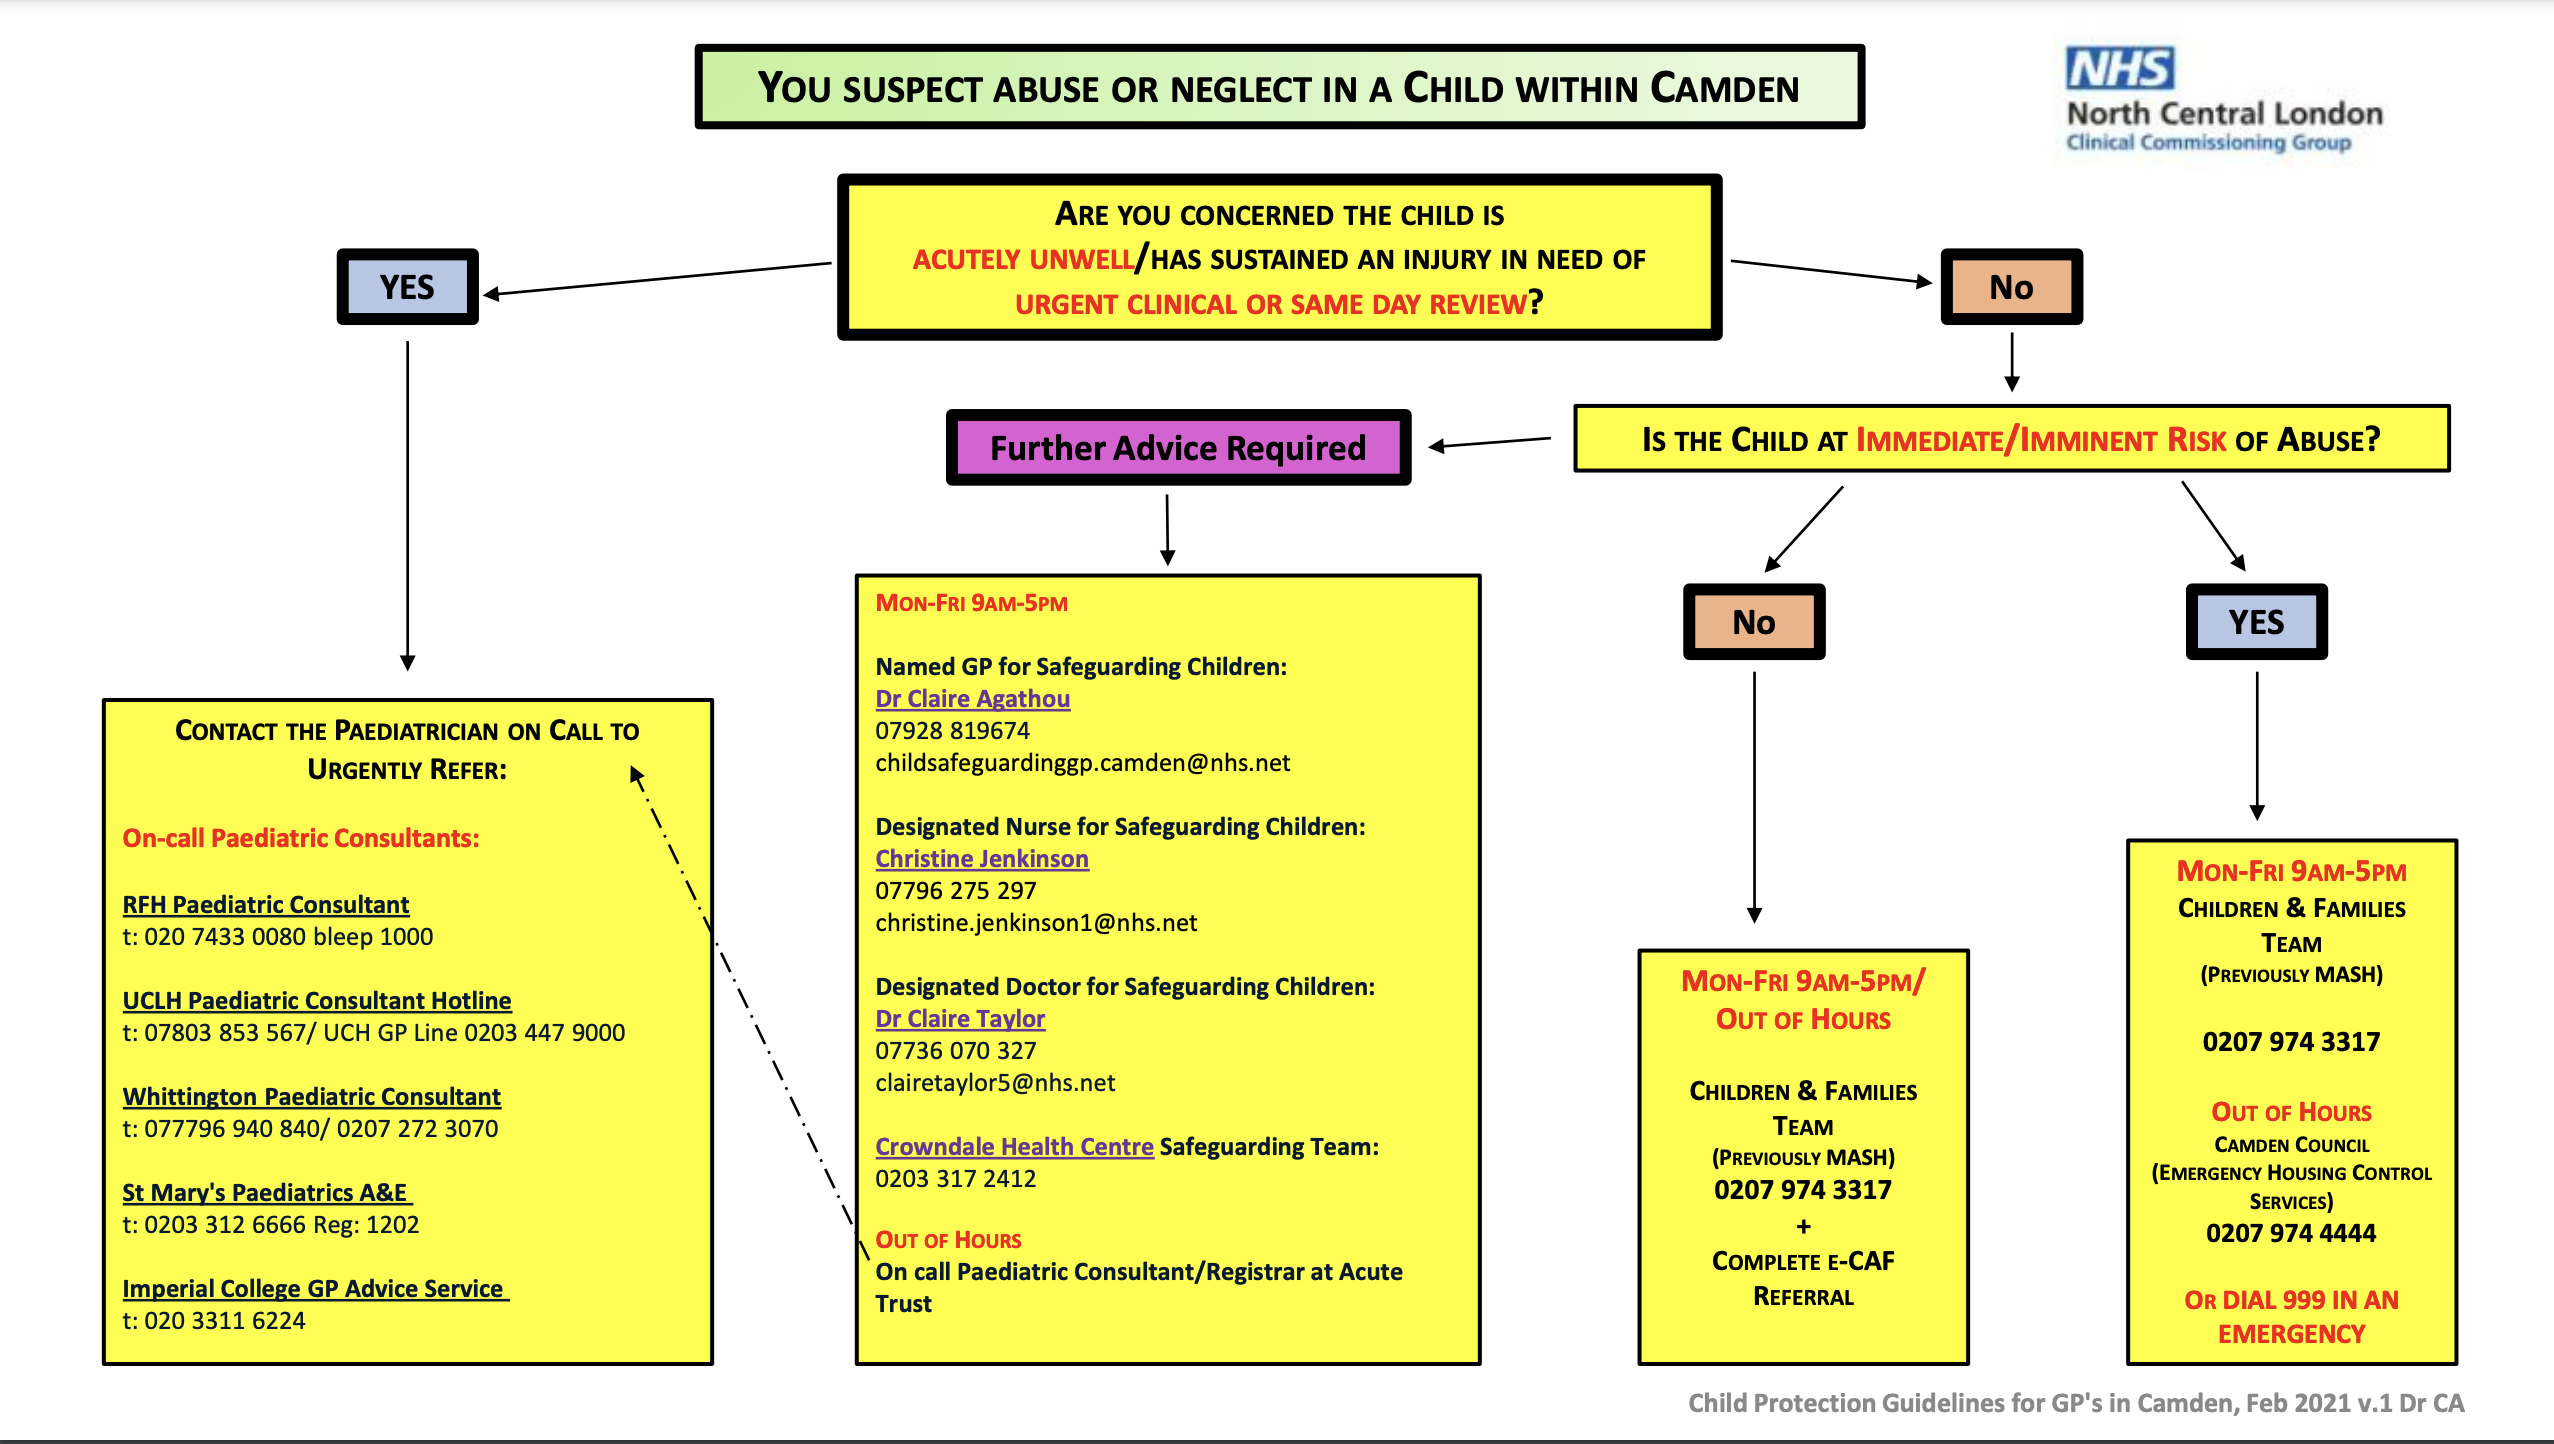 child protection guidelines flow diagram